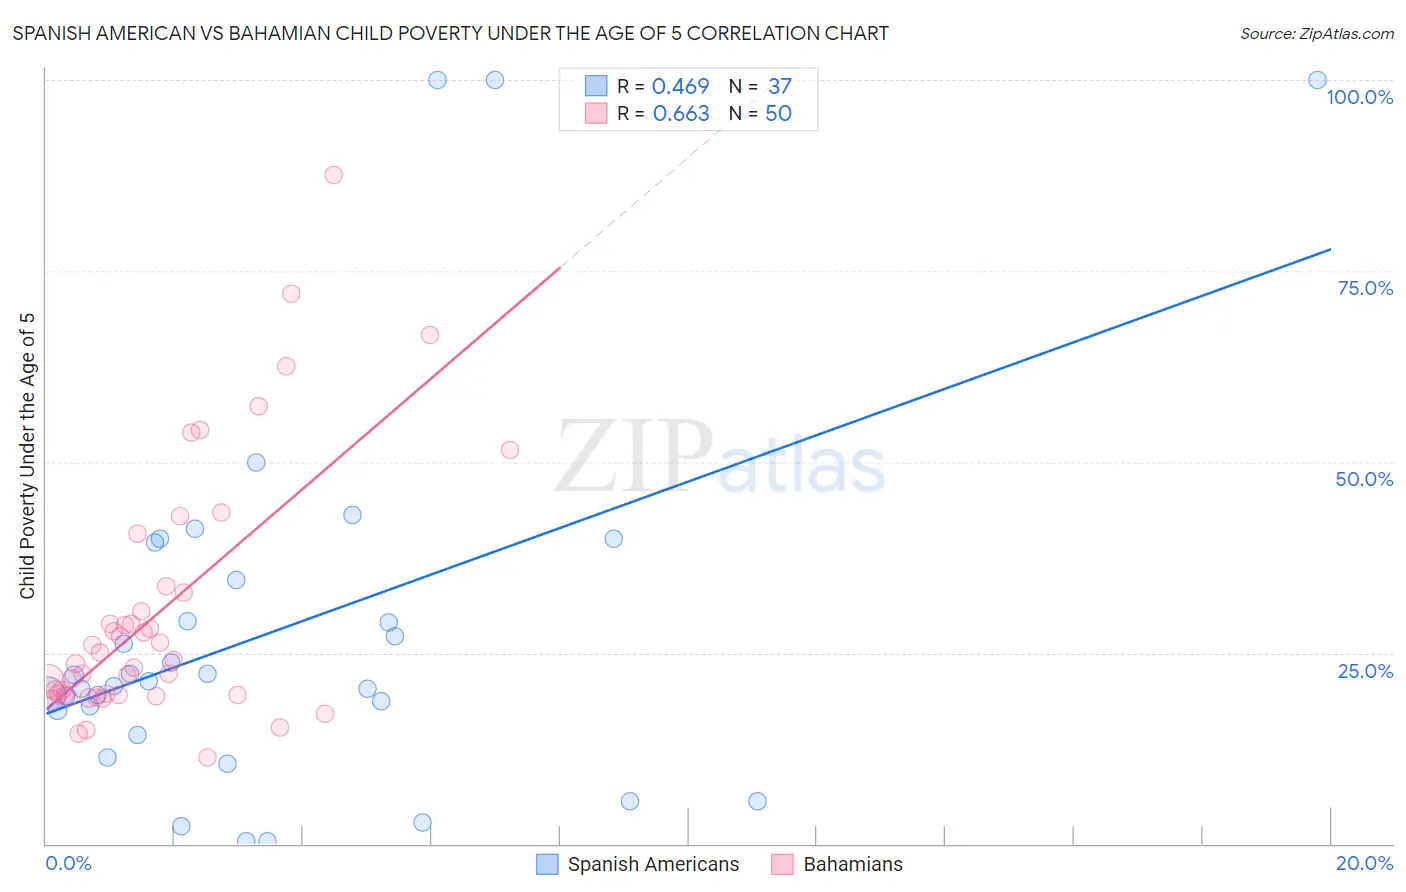 Spanish American vs Bahamian Child Poverty Under the Age of 5